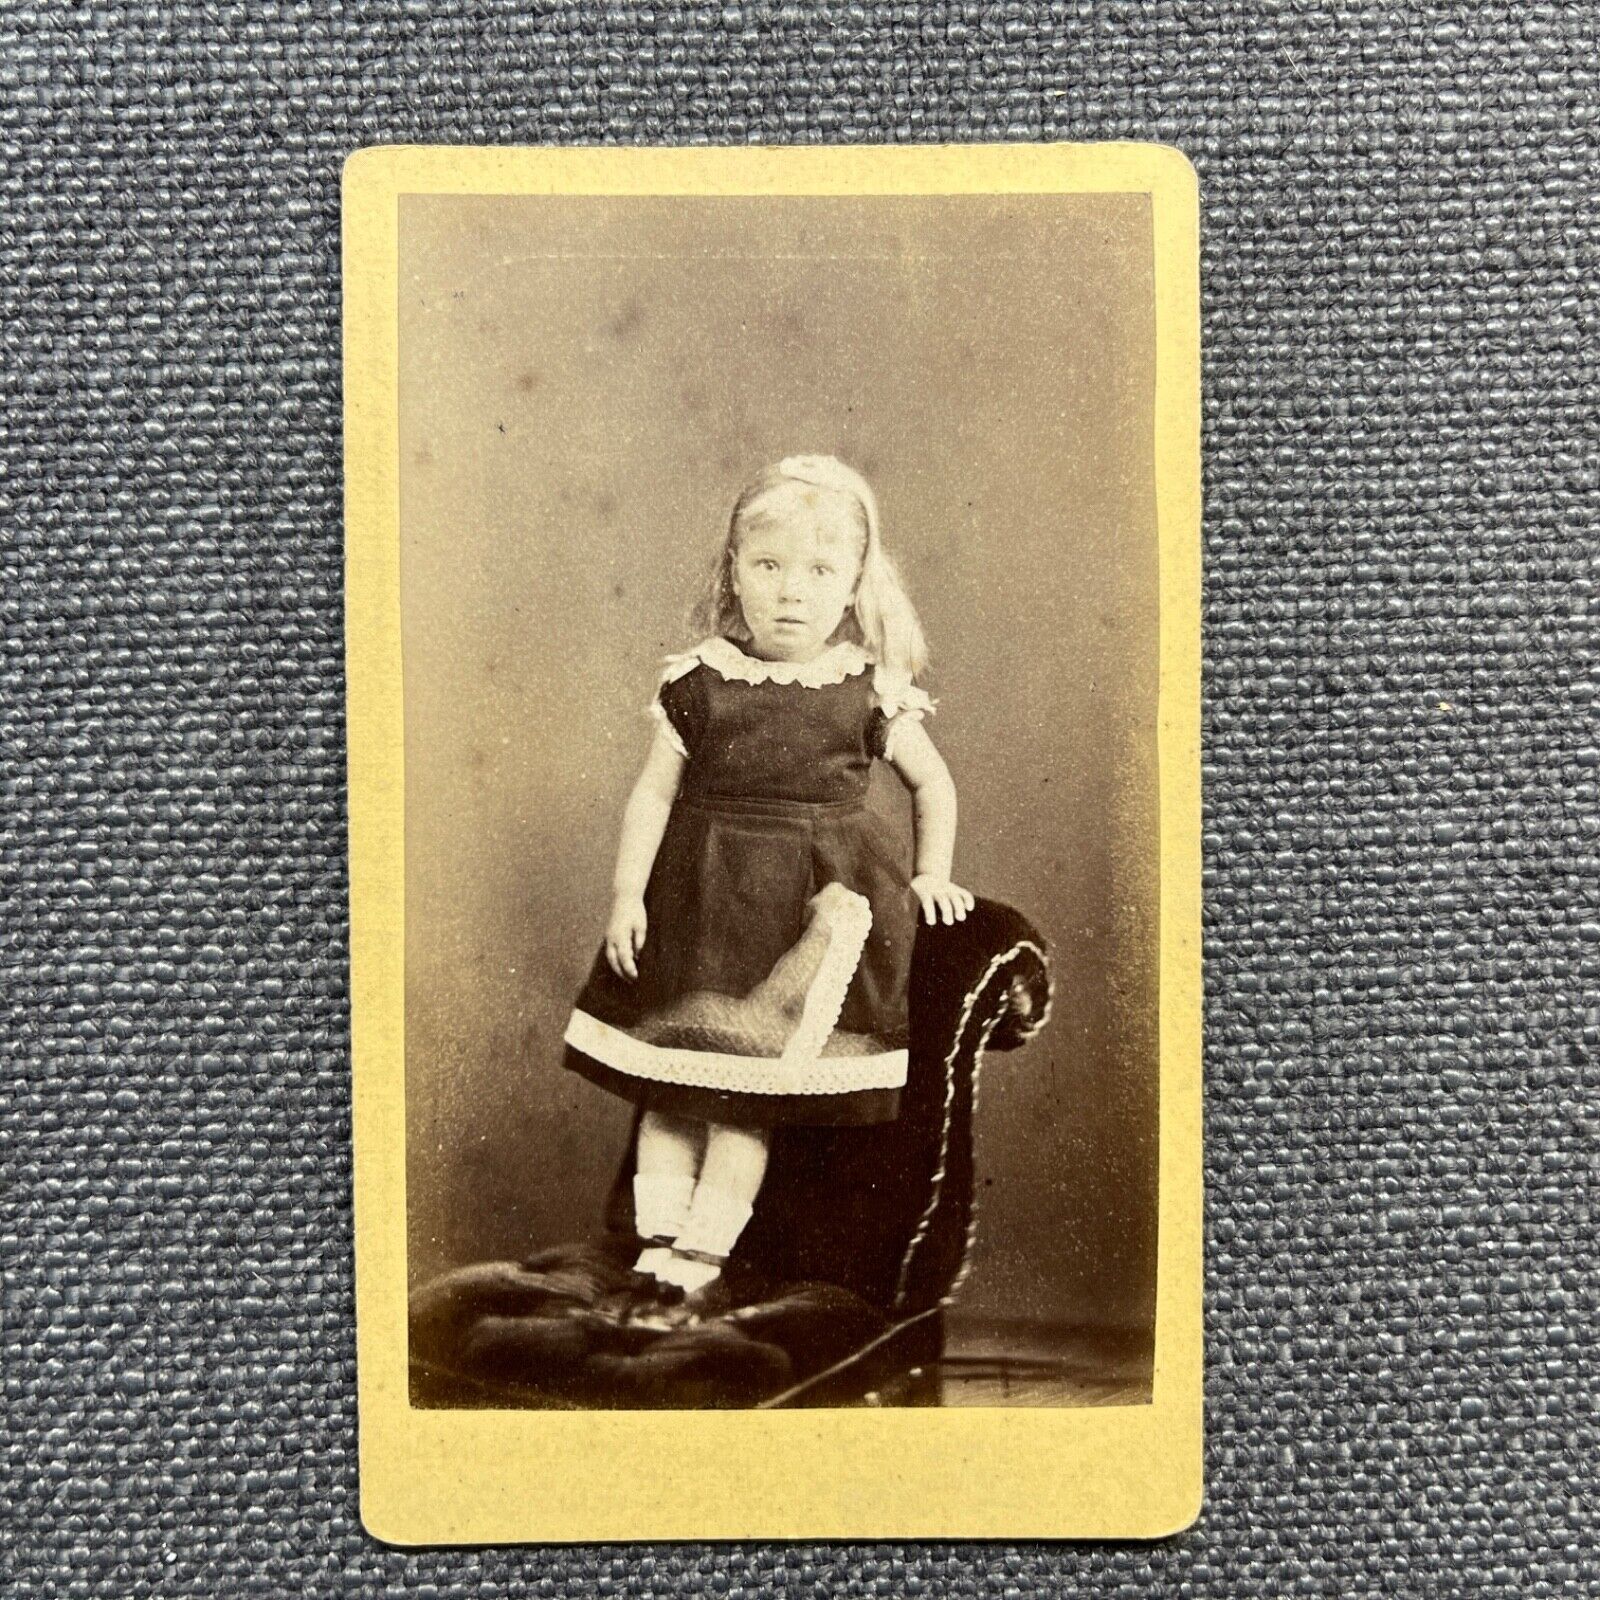 CDV Photo Antique Portrait Young Girl in Fashion Dress Standing on Chair UK